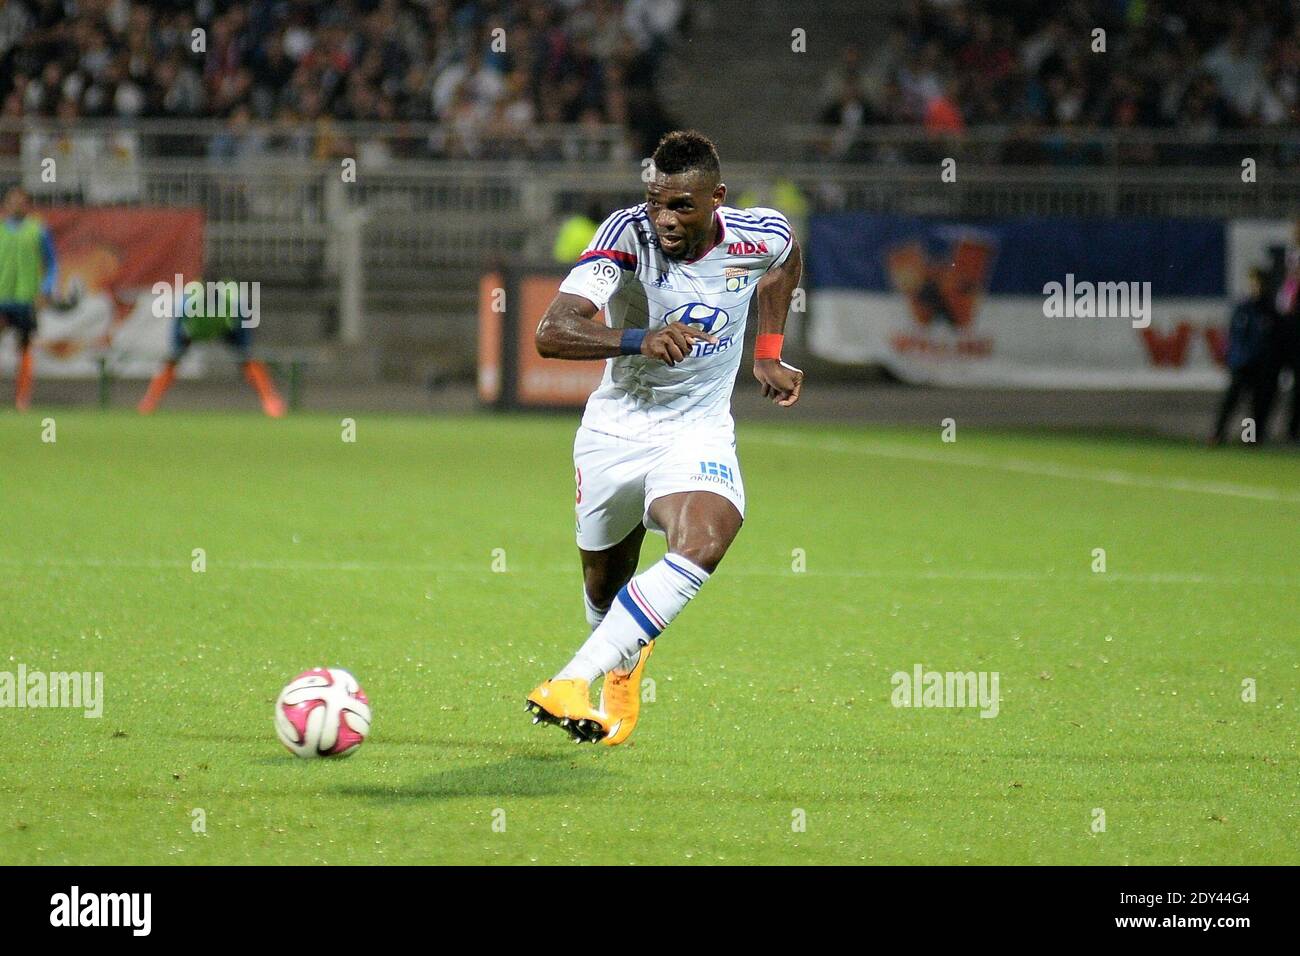 OL's Henri Bedimo during the French First League soccer match, Olympique Lyonnais (OL) Vs Montpellier HSC (MHSC) at Gerland stadium in Lyon, France on October 19, 2014. Lyon won 5-1. Photo by Nicolas Briquet/ABACAPRESS.COM Stock Photo